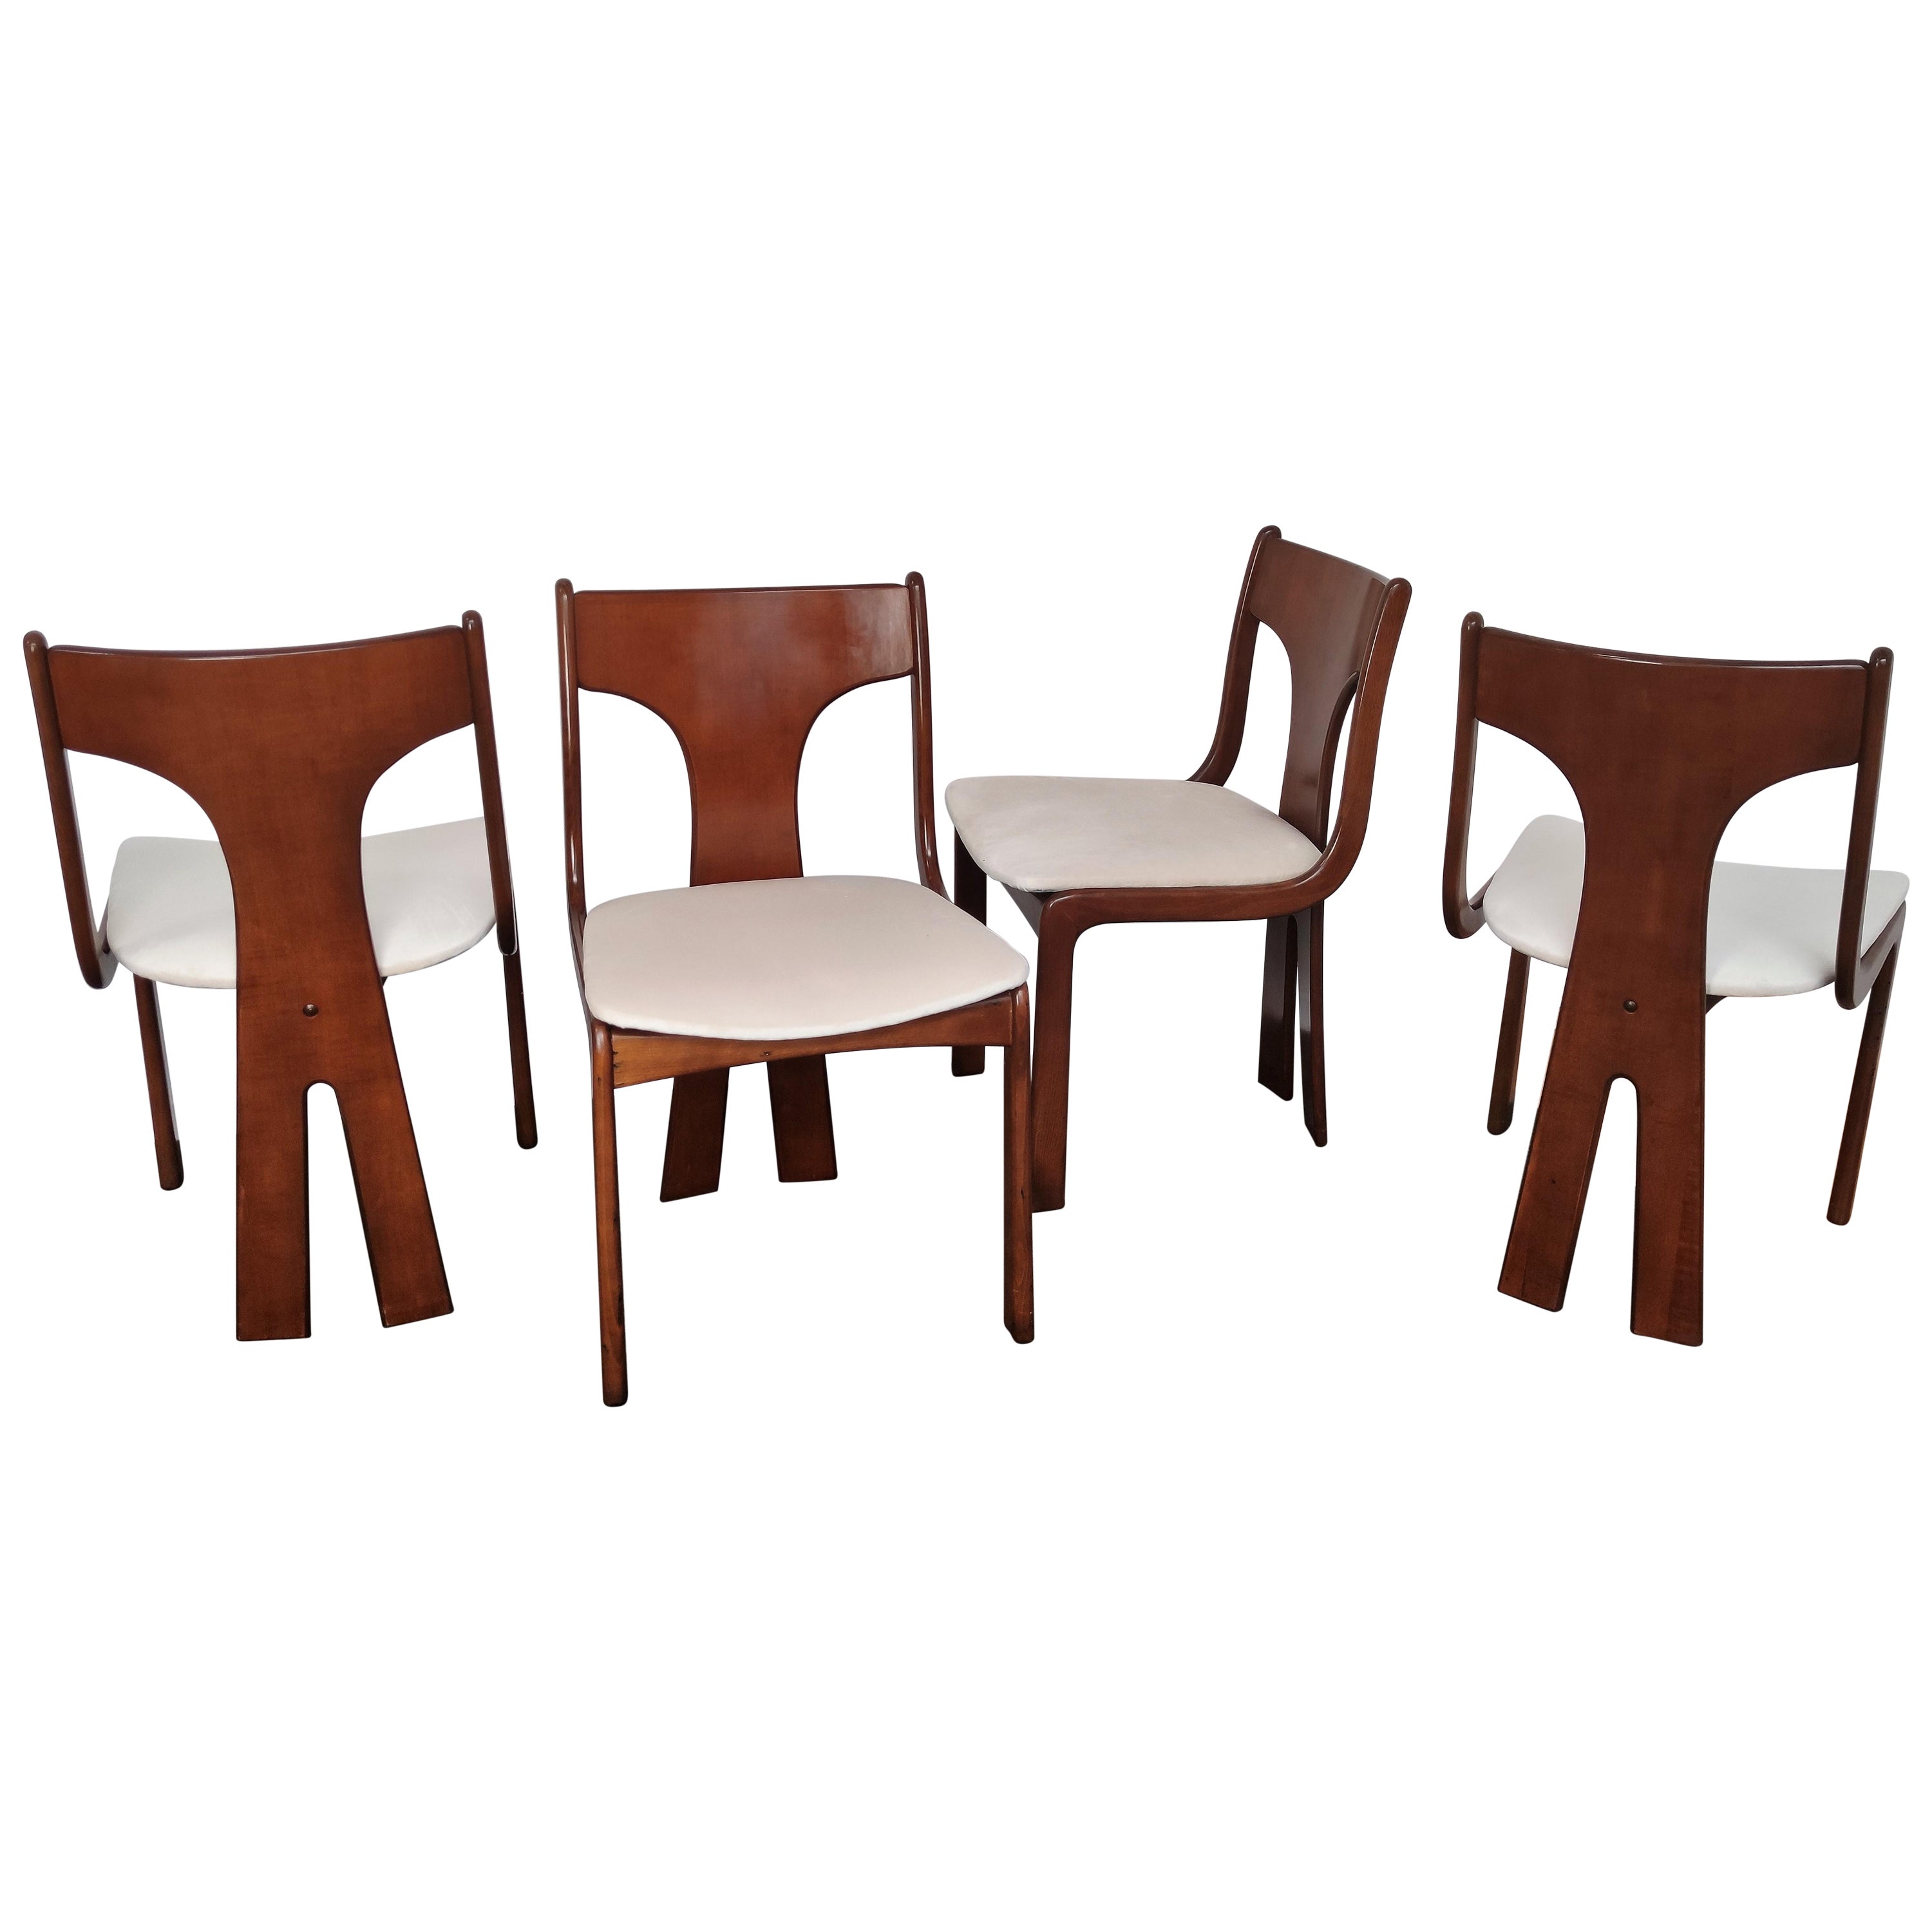 Four 1950s Italian Mid-Century Modern Newly Upholstered Dining Room Chairs